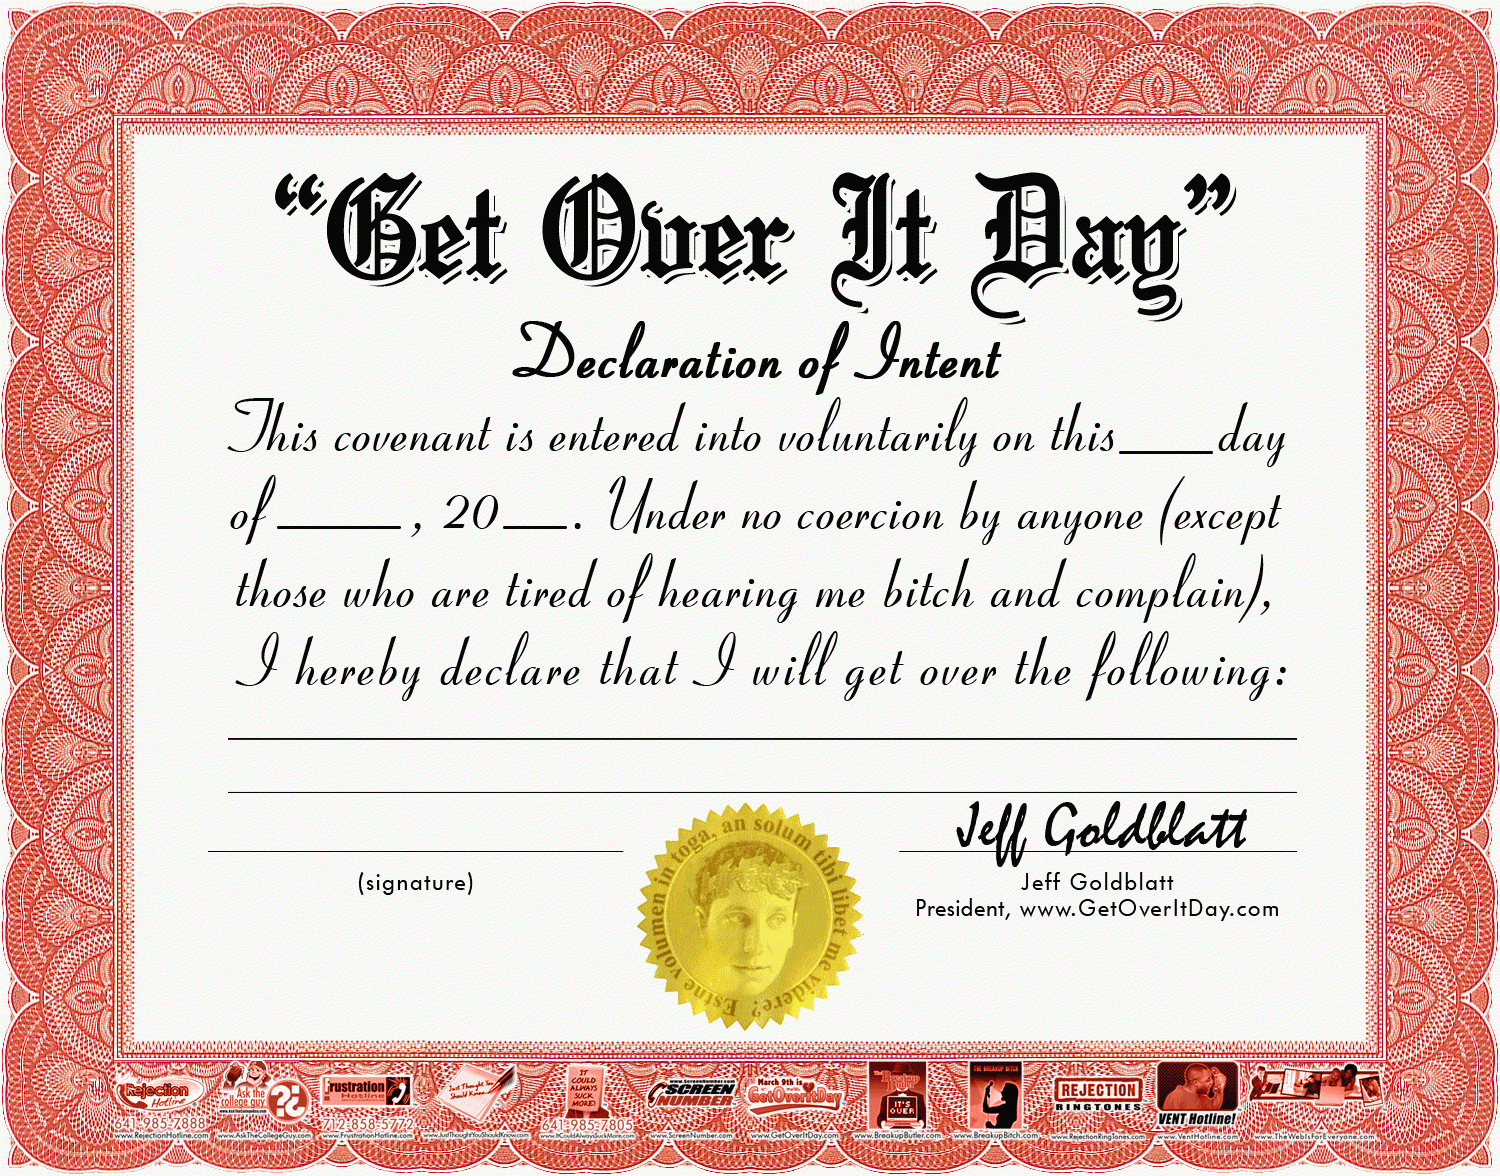 Funny Office Awards Youtube. Silly Certificates Funny Awards In Funny Certificate Templates